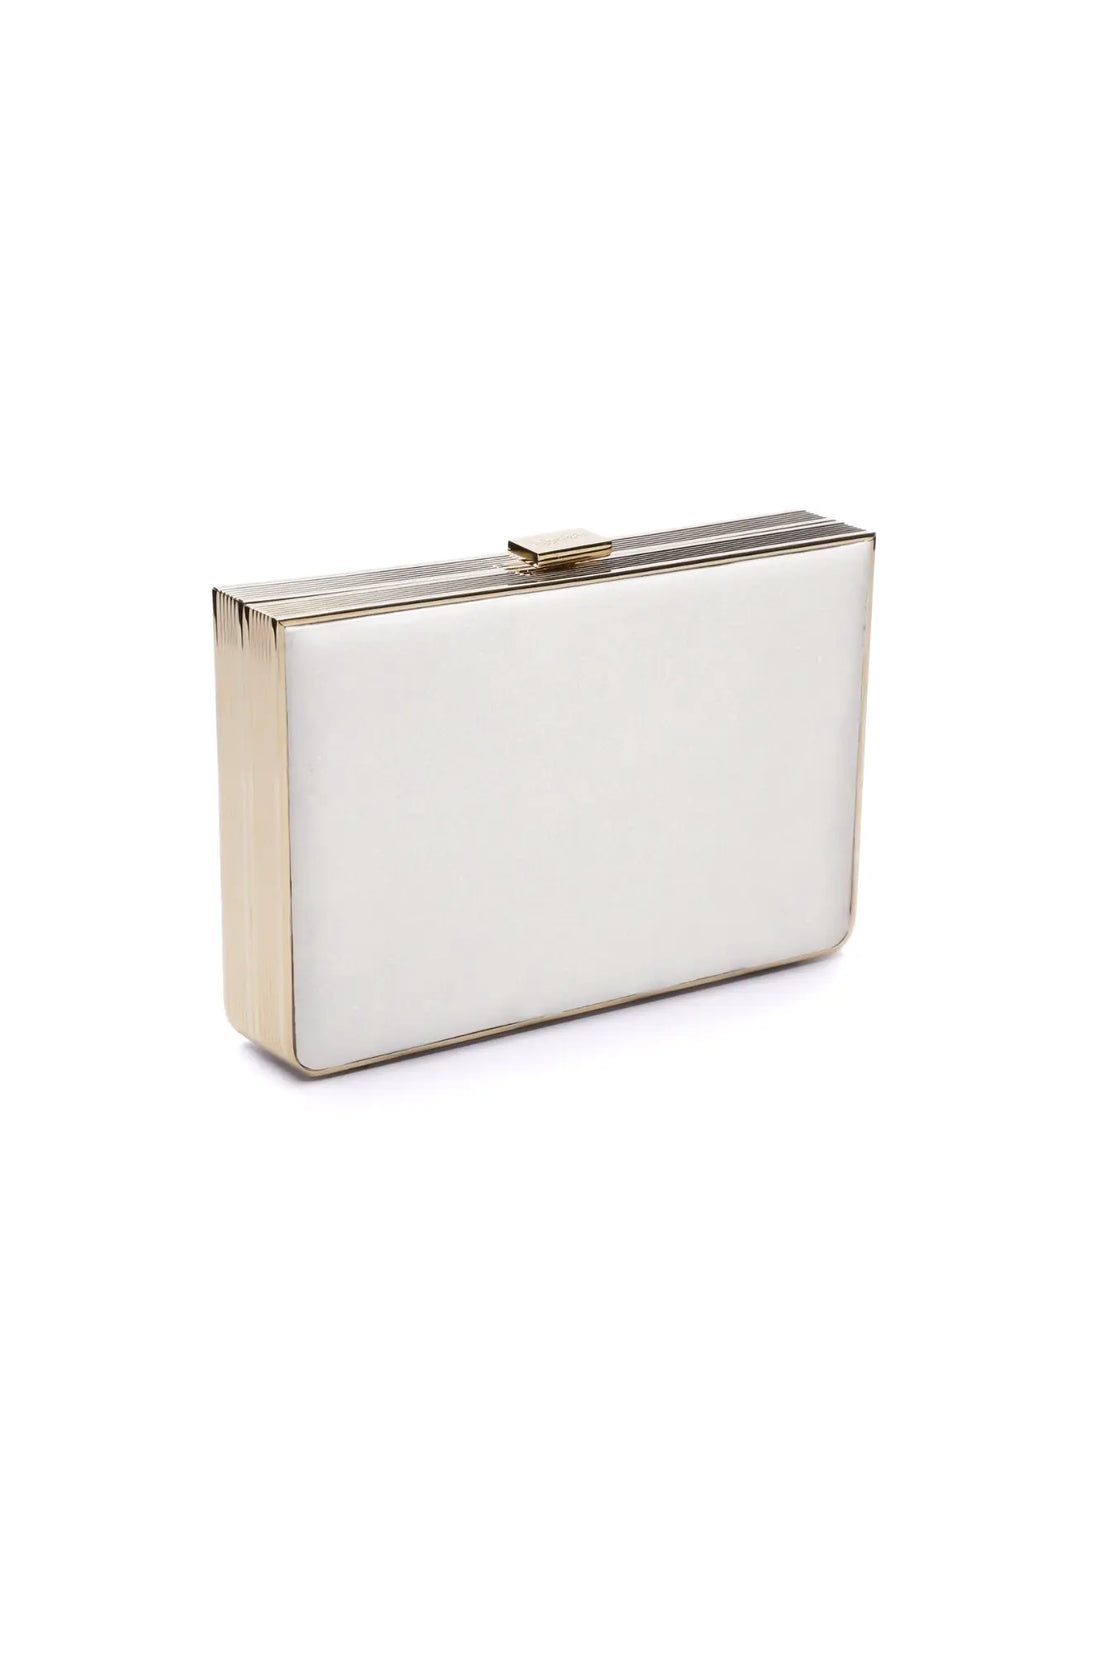 Venezia Clutch x MICAELA - Ivory Satin clutch purse with metallic clasp and ribbed detailing on a white background by The Bella Rosa Collection.